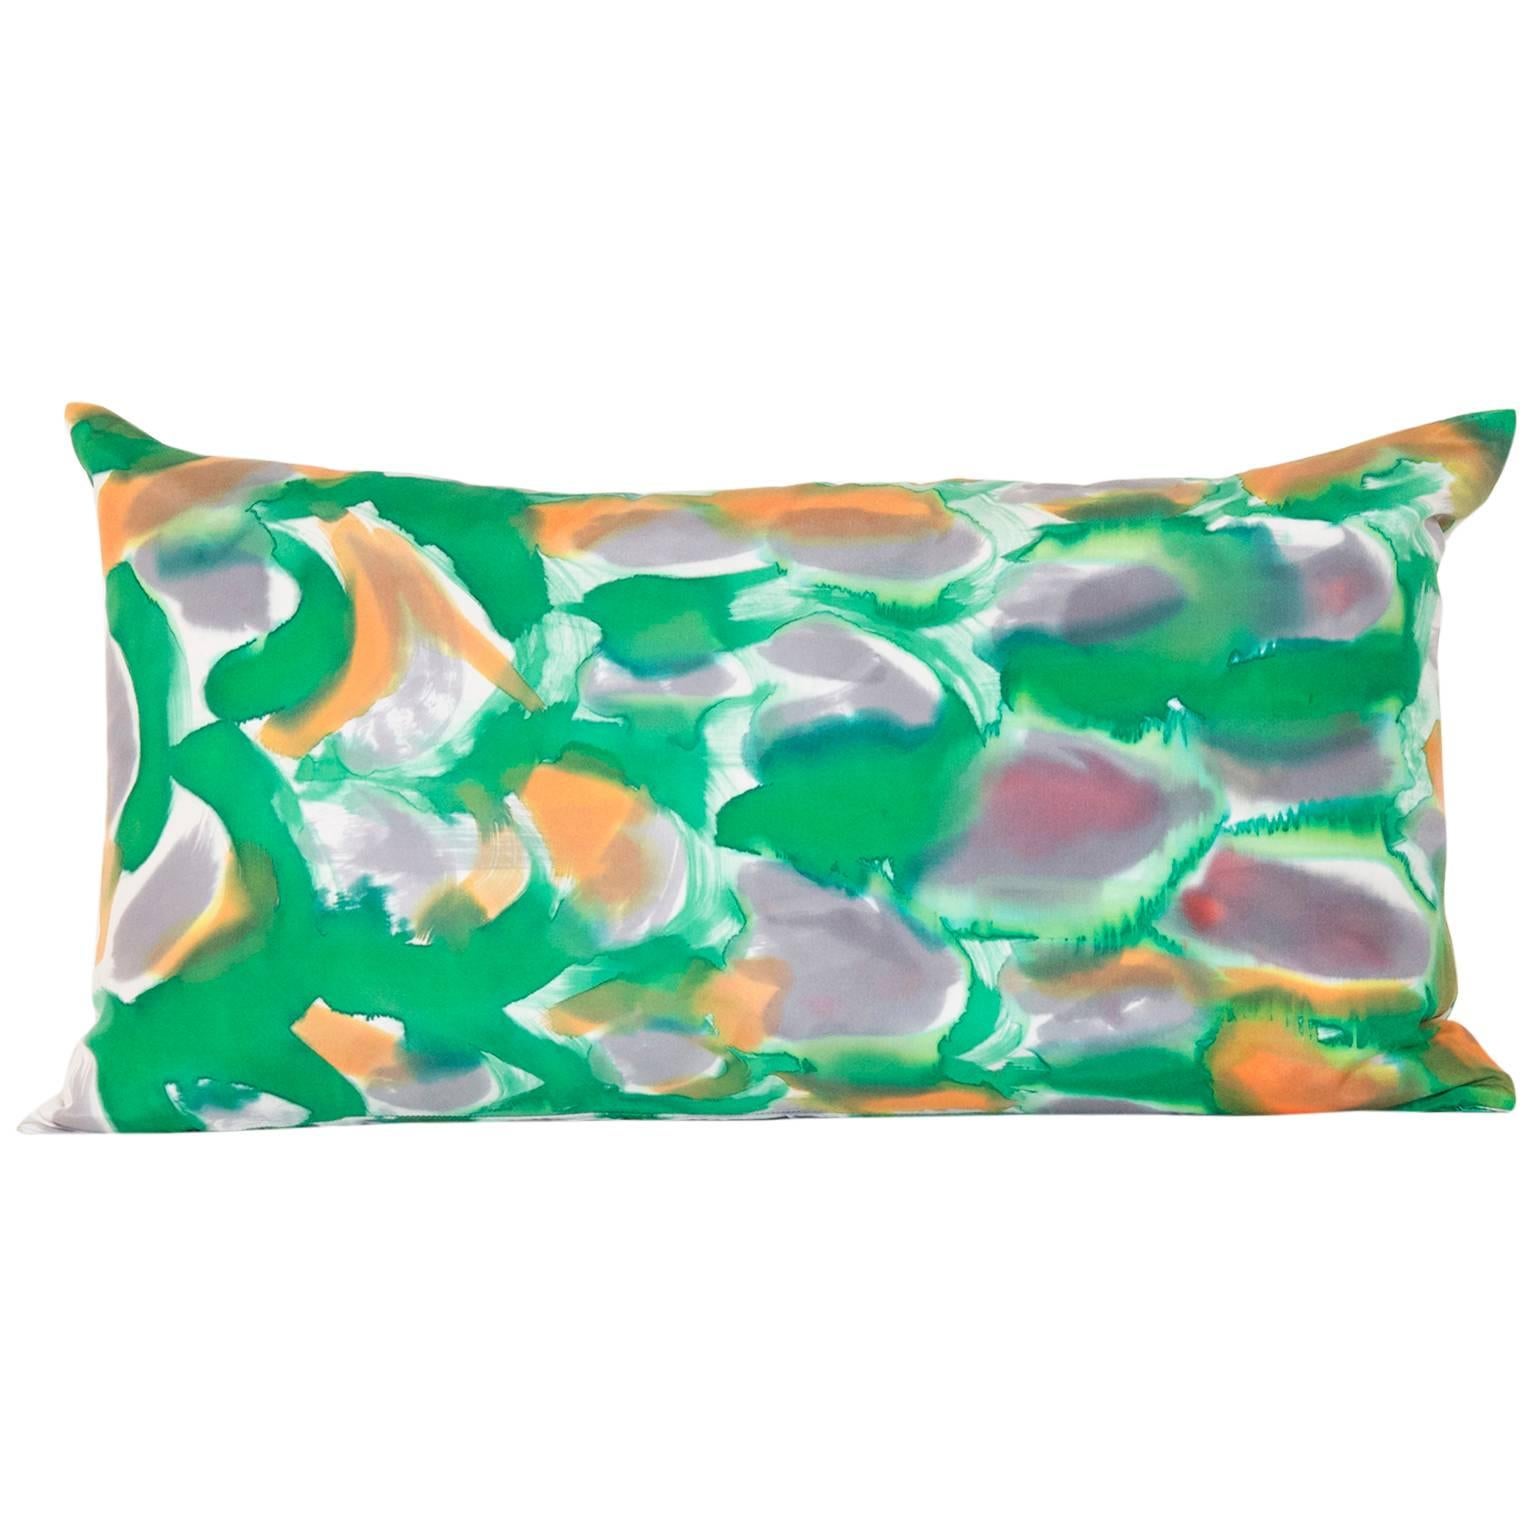 Hand-Painted Green Scales Silk Charmeuse Lumbar Pillow